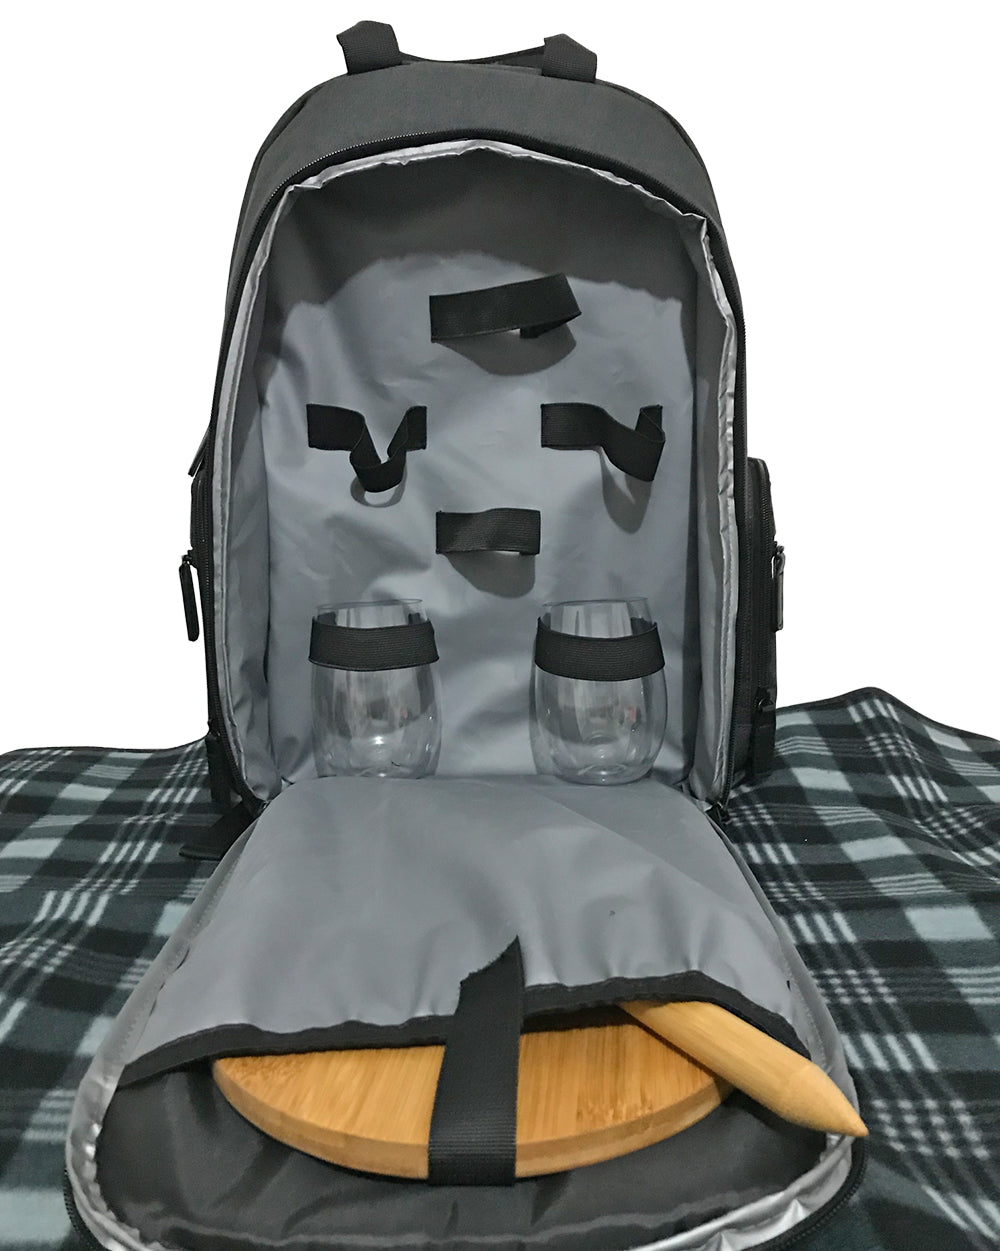 Wither Hills Picnic Wine Bag -  Beer Gear Apparel & Merchandise - Speights - Lion Red - VB - Tokyo Dy merch